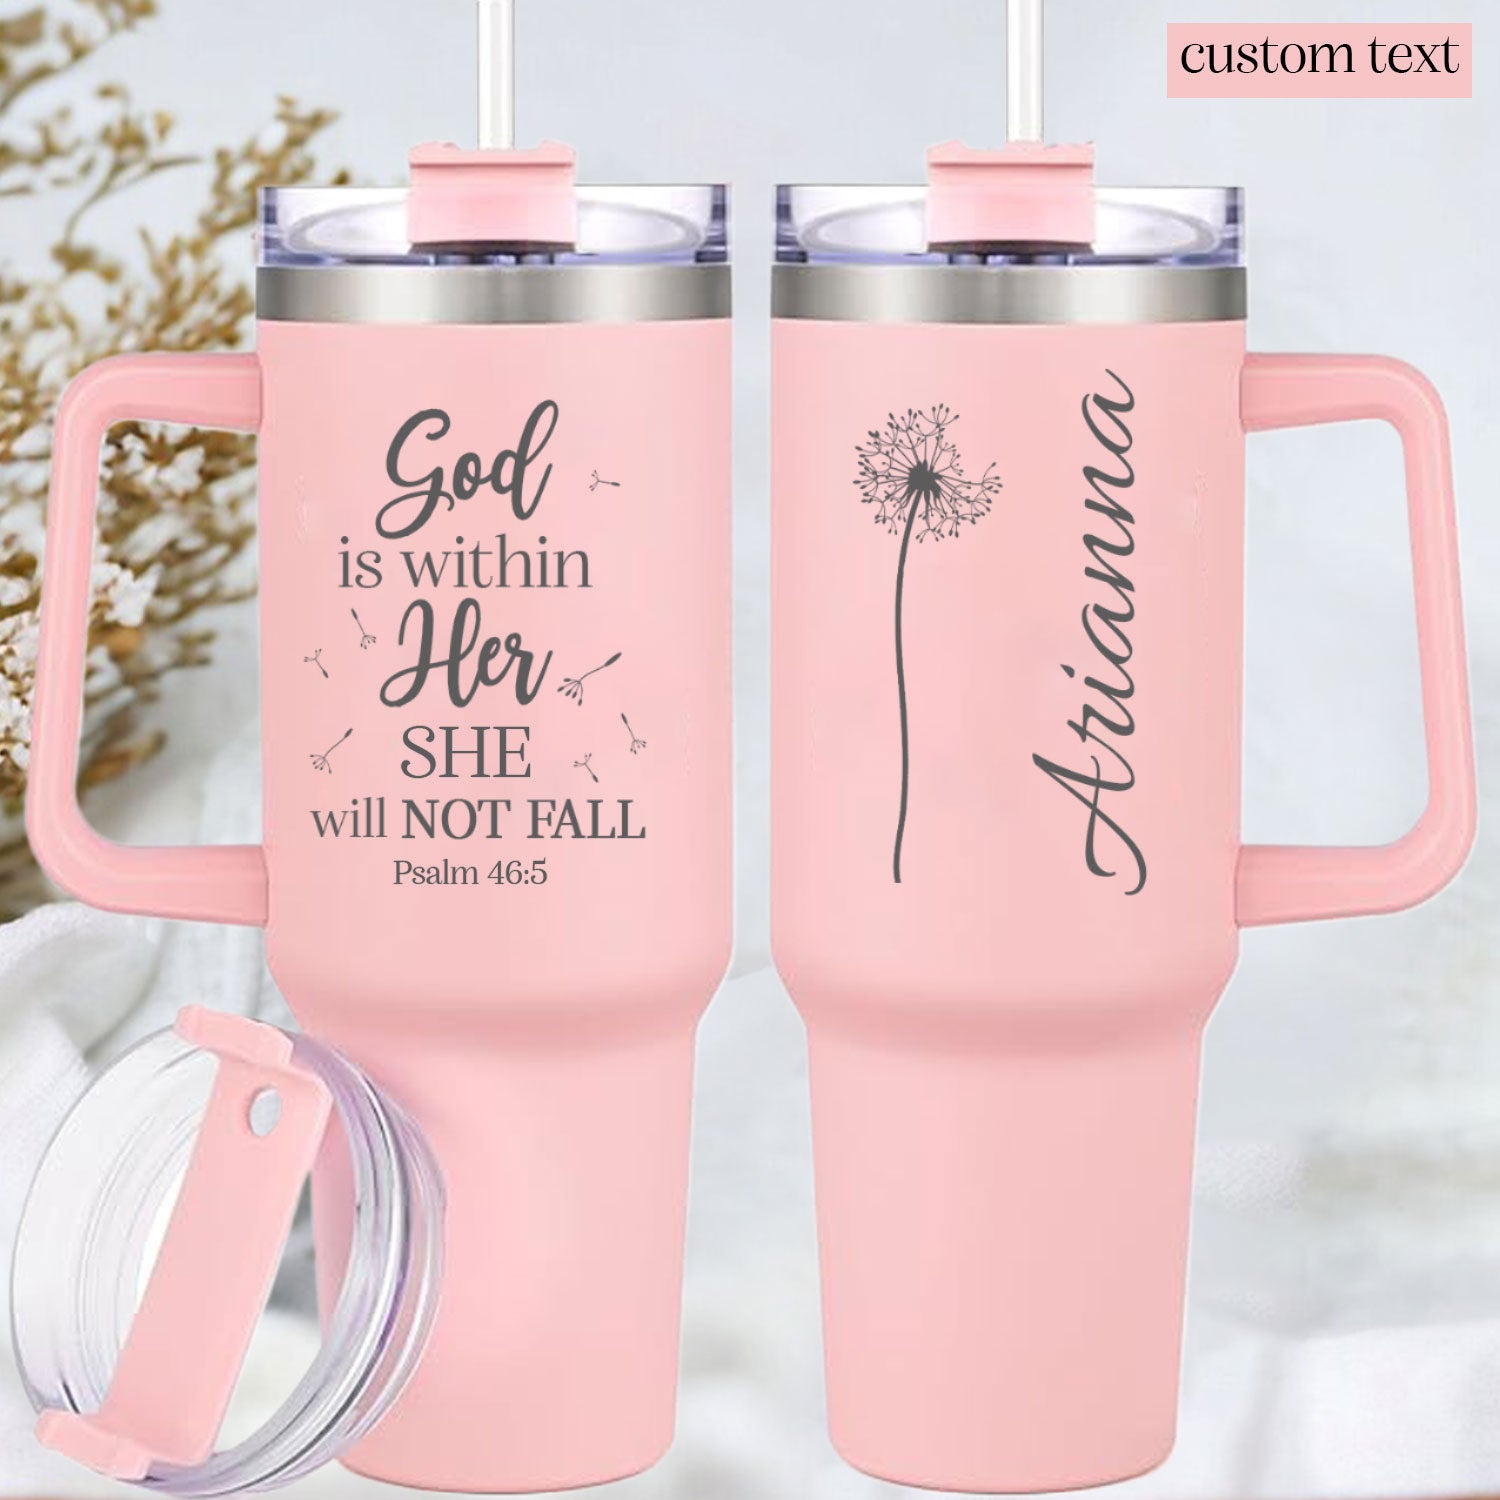 She will not fall 40oz Tumbler Travel Cup - Birthday, Christmas Gifts for Women - Religious, Self Care Inspiration Gifts